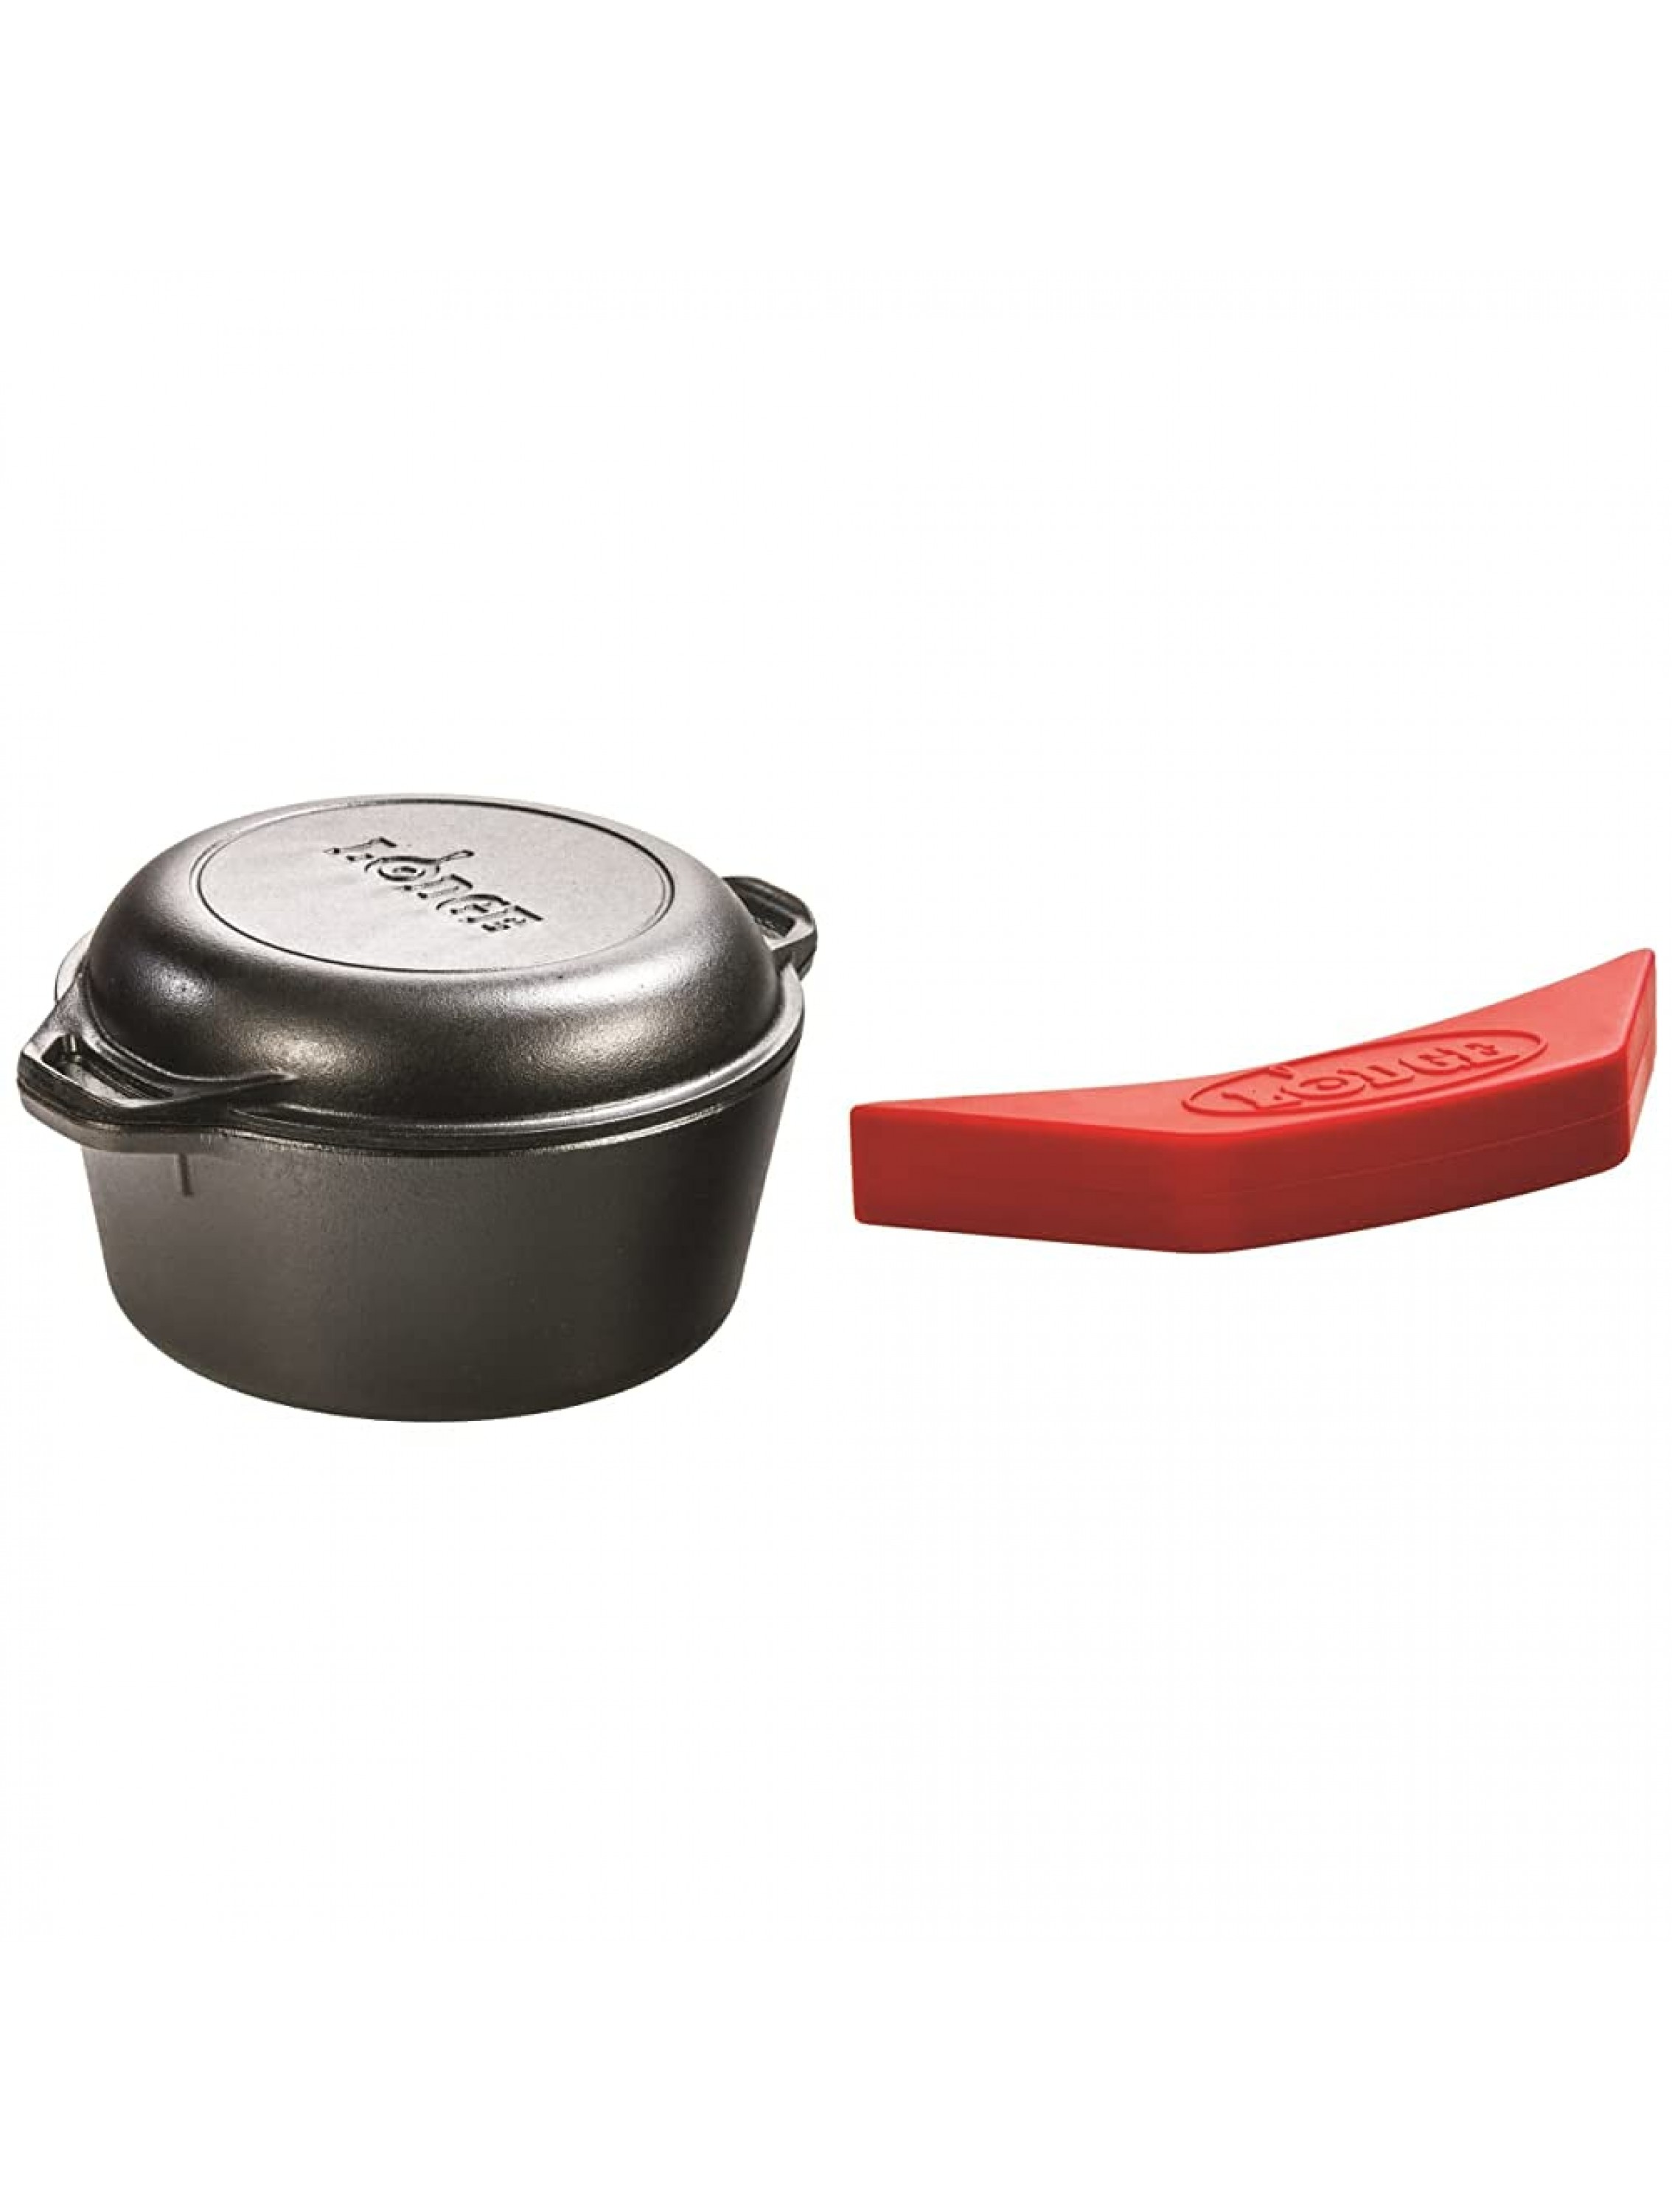 Lodge Pre-Seasoned Cast Iron Double Dutch Oven With Loop Handles 5 qt & ASAHH41 Silicone Assist Handle Holder Red 5.5 x 2 - BHQXWHVEK